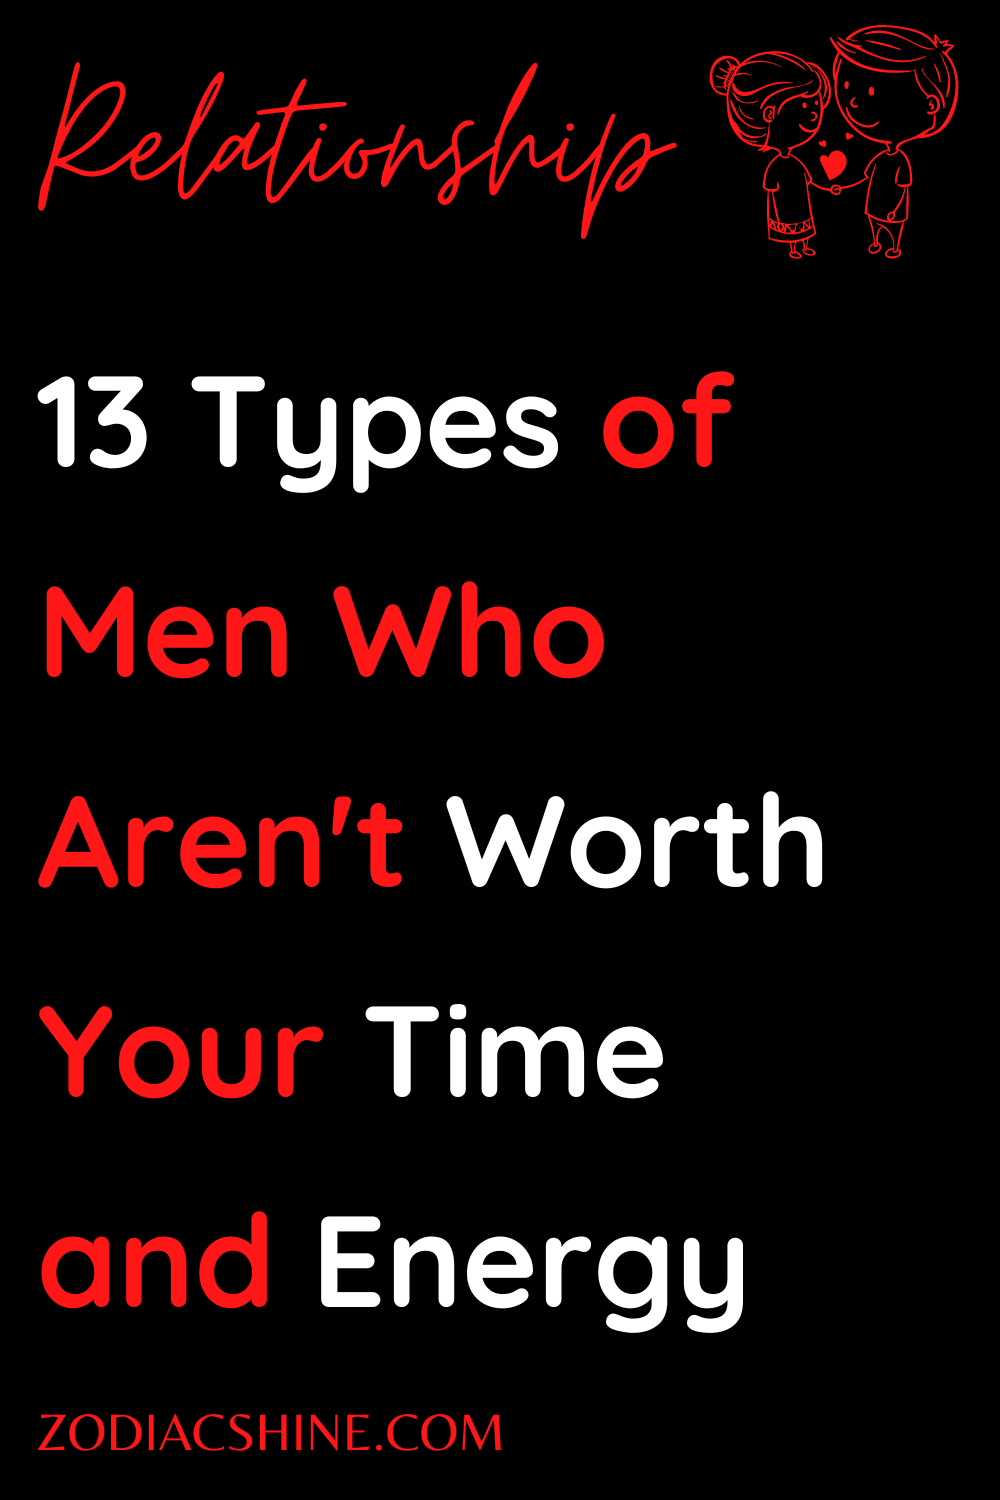 13 Types of Men Who Aren't Worth Your Time and Energy